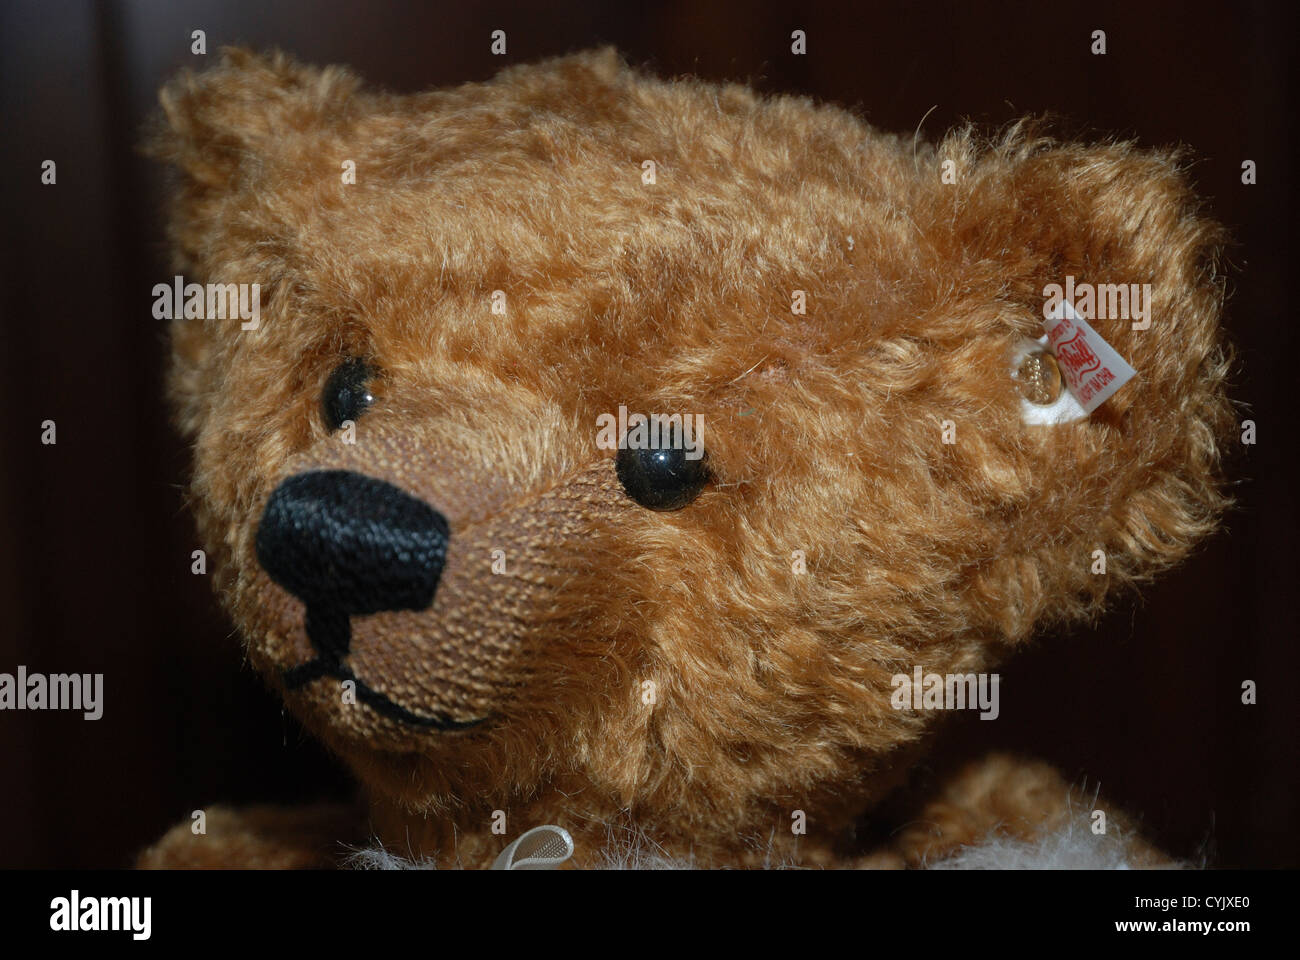 TIL the most expensive teddy bear in the world is Steiff Louis